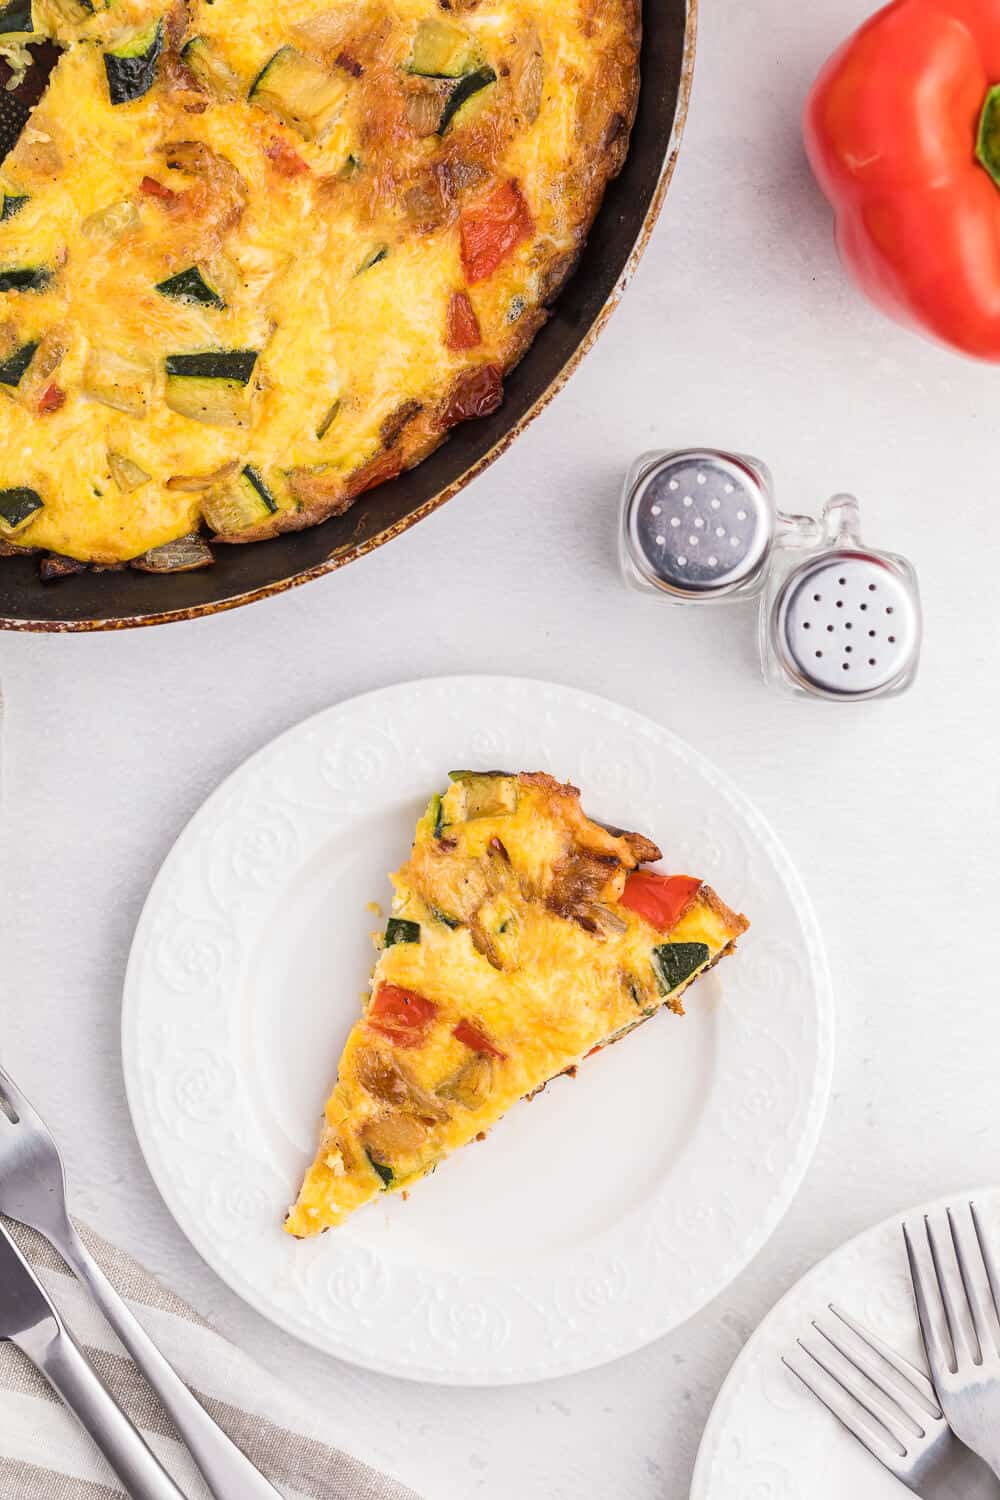 Caramelized Onion, Red Pepper & Zucchini Frittata - Loaded with red pepper and zucchini, this veggie-packed dish is healthy and filling - and low carb too!